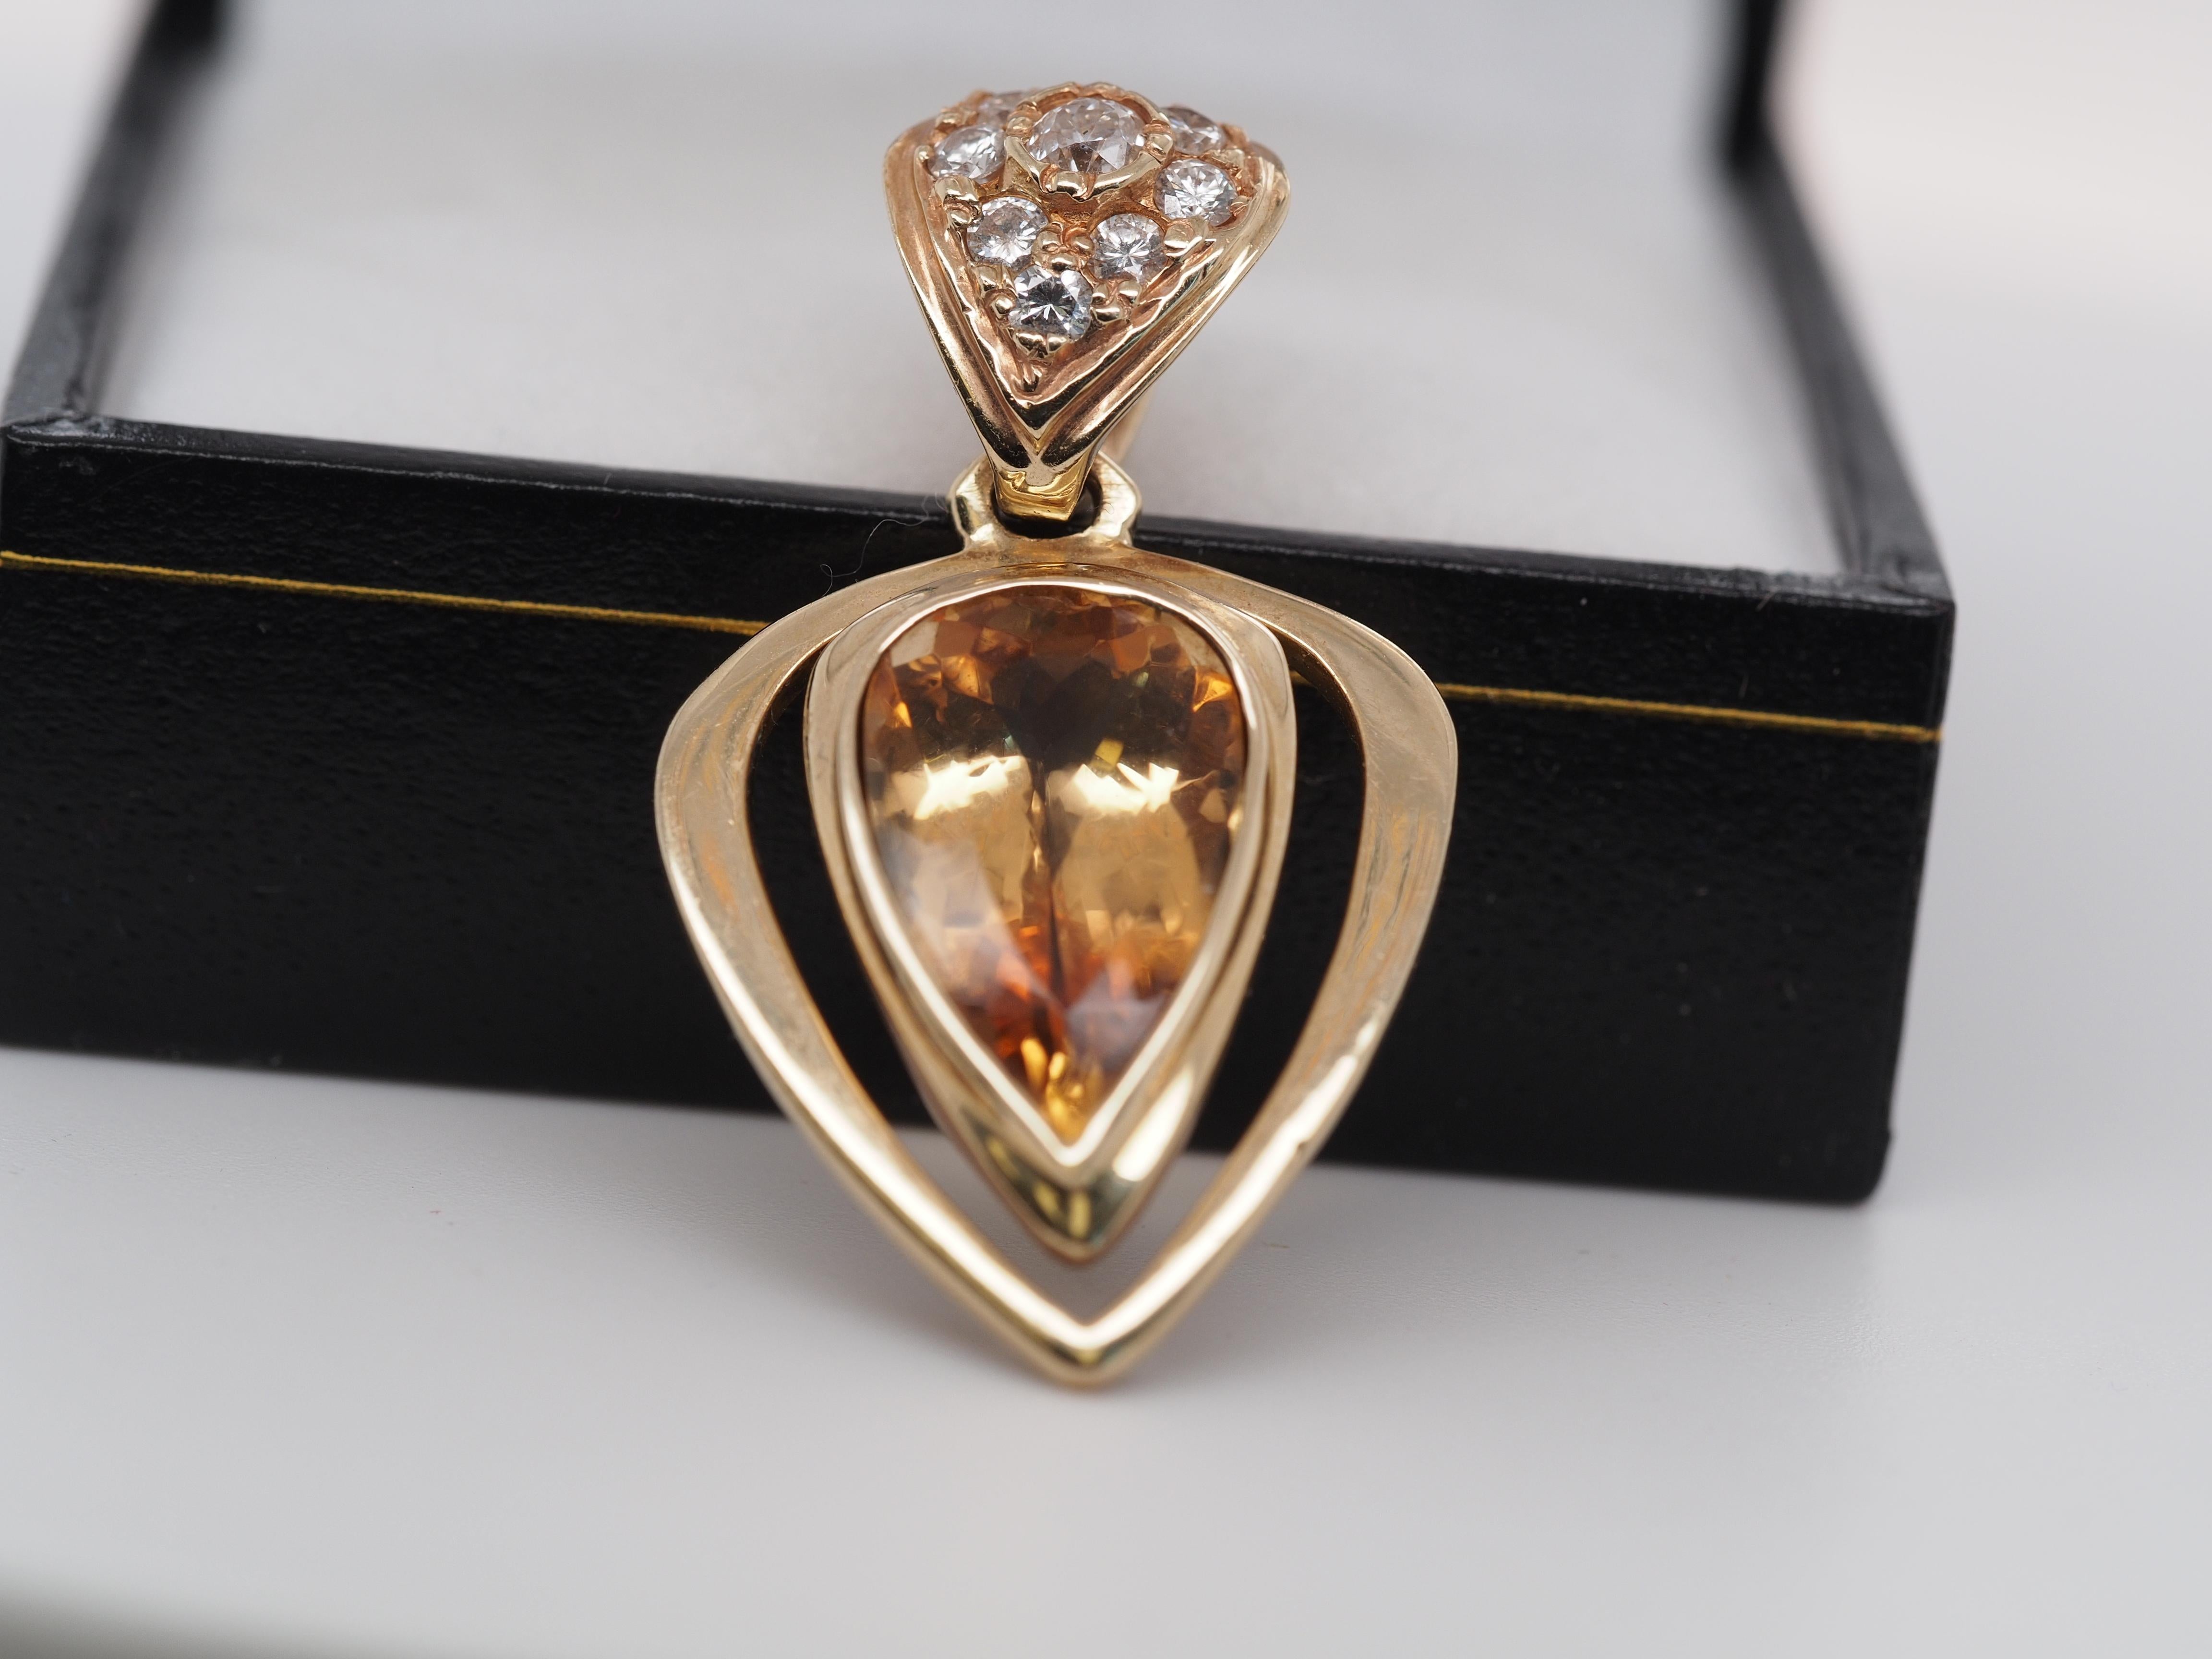 Item Details:
Metal Type: 14K Yellow Gold [Hallmarked, and Tested]
Weight: 6.8 grams
Citrine Details:
Shape: Pear
Size: 3ct
Diamond Details: Round Brilliant, .30ct total weight, F-G Color, VS Clarity
Condition: Excellent